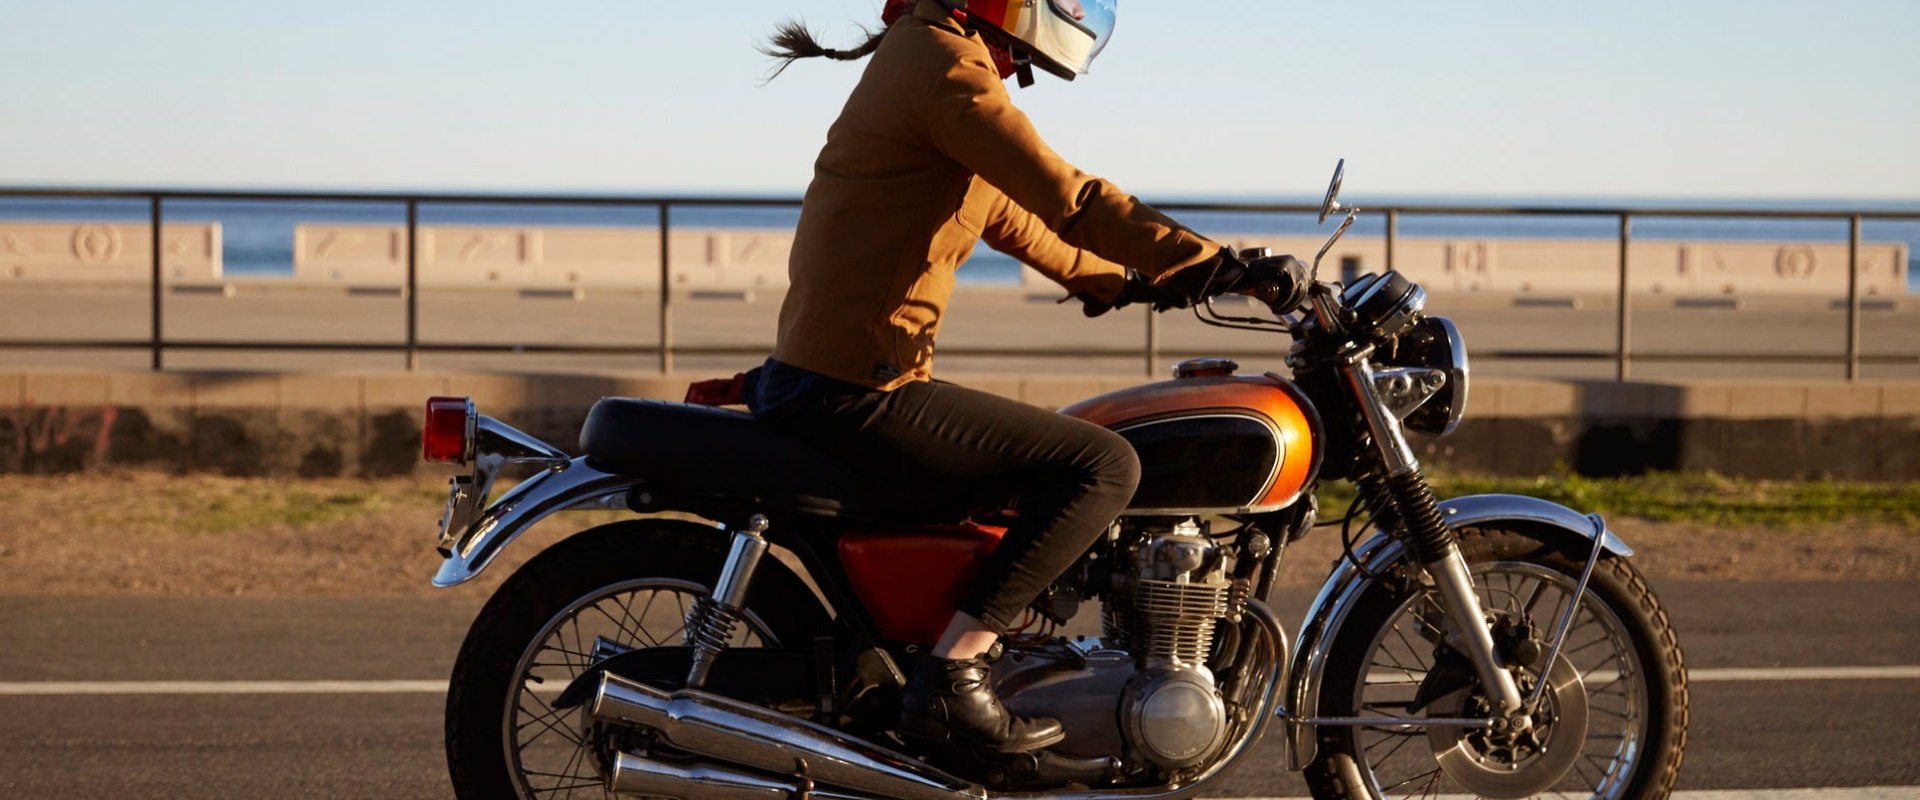 Finding the Right Motorcycle Insurance in California